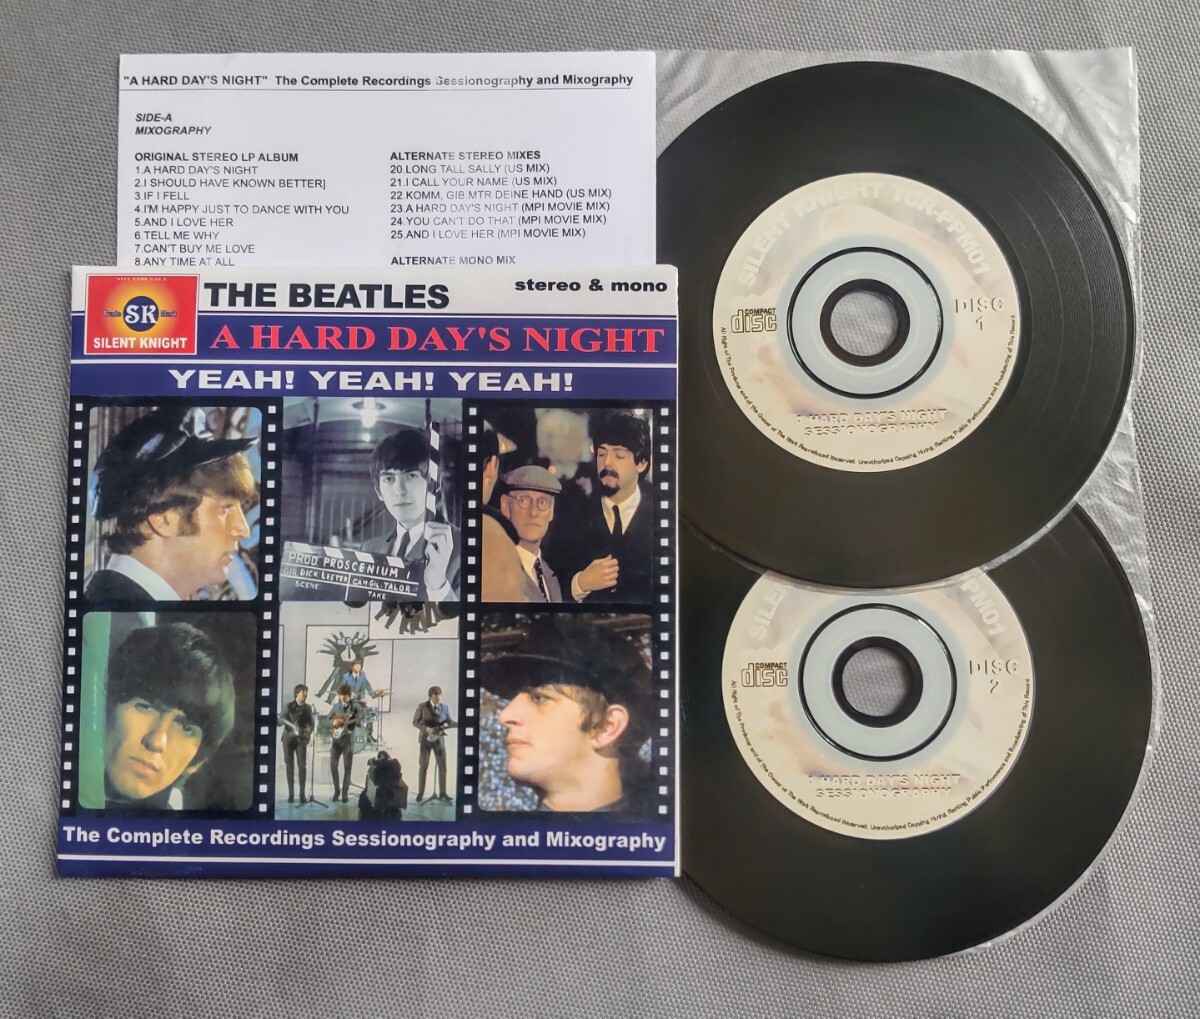 THE BEATLES 紙ジャケ 2CD 「A HARD DAY’S NIGHT」THE COMPLETE RECORDINGS SESSIONOGRAPHY & MIXOGRAPHY SILENT KNIGHTの画像3